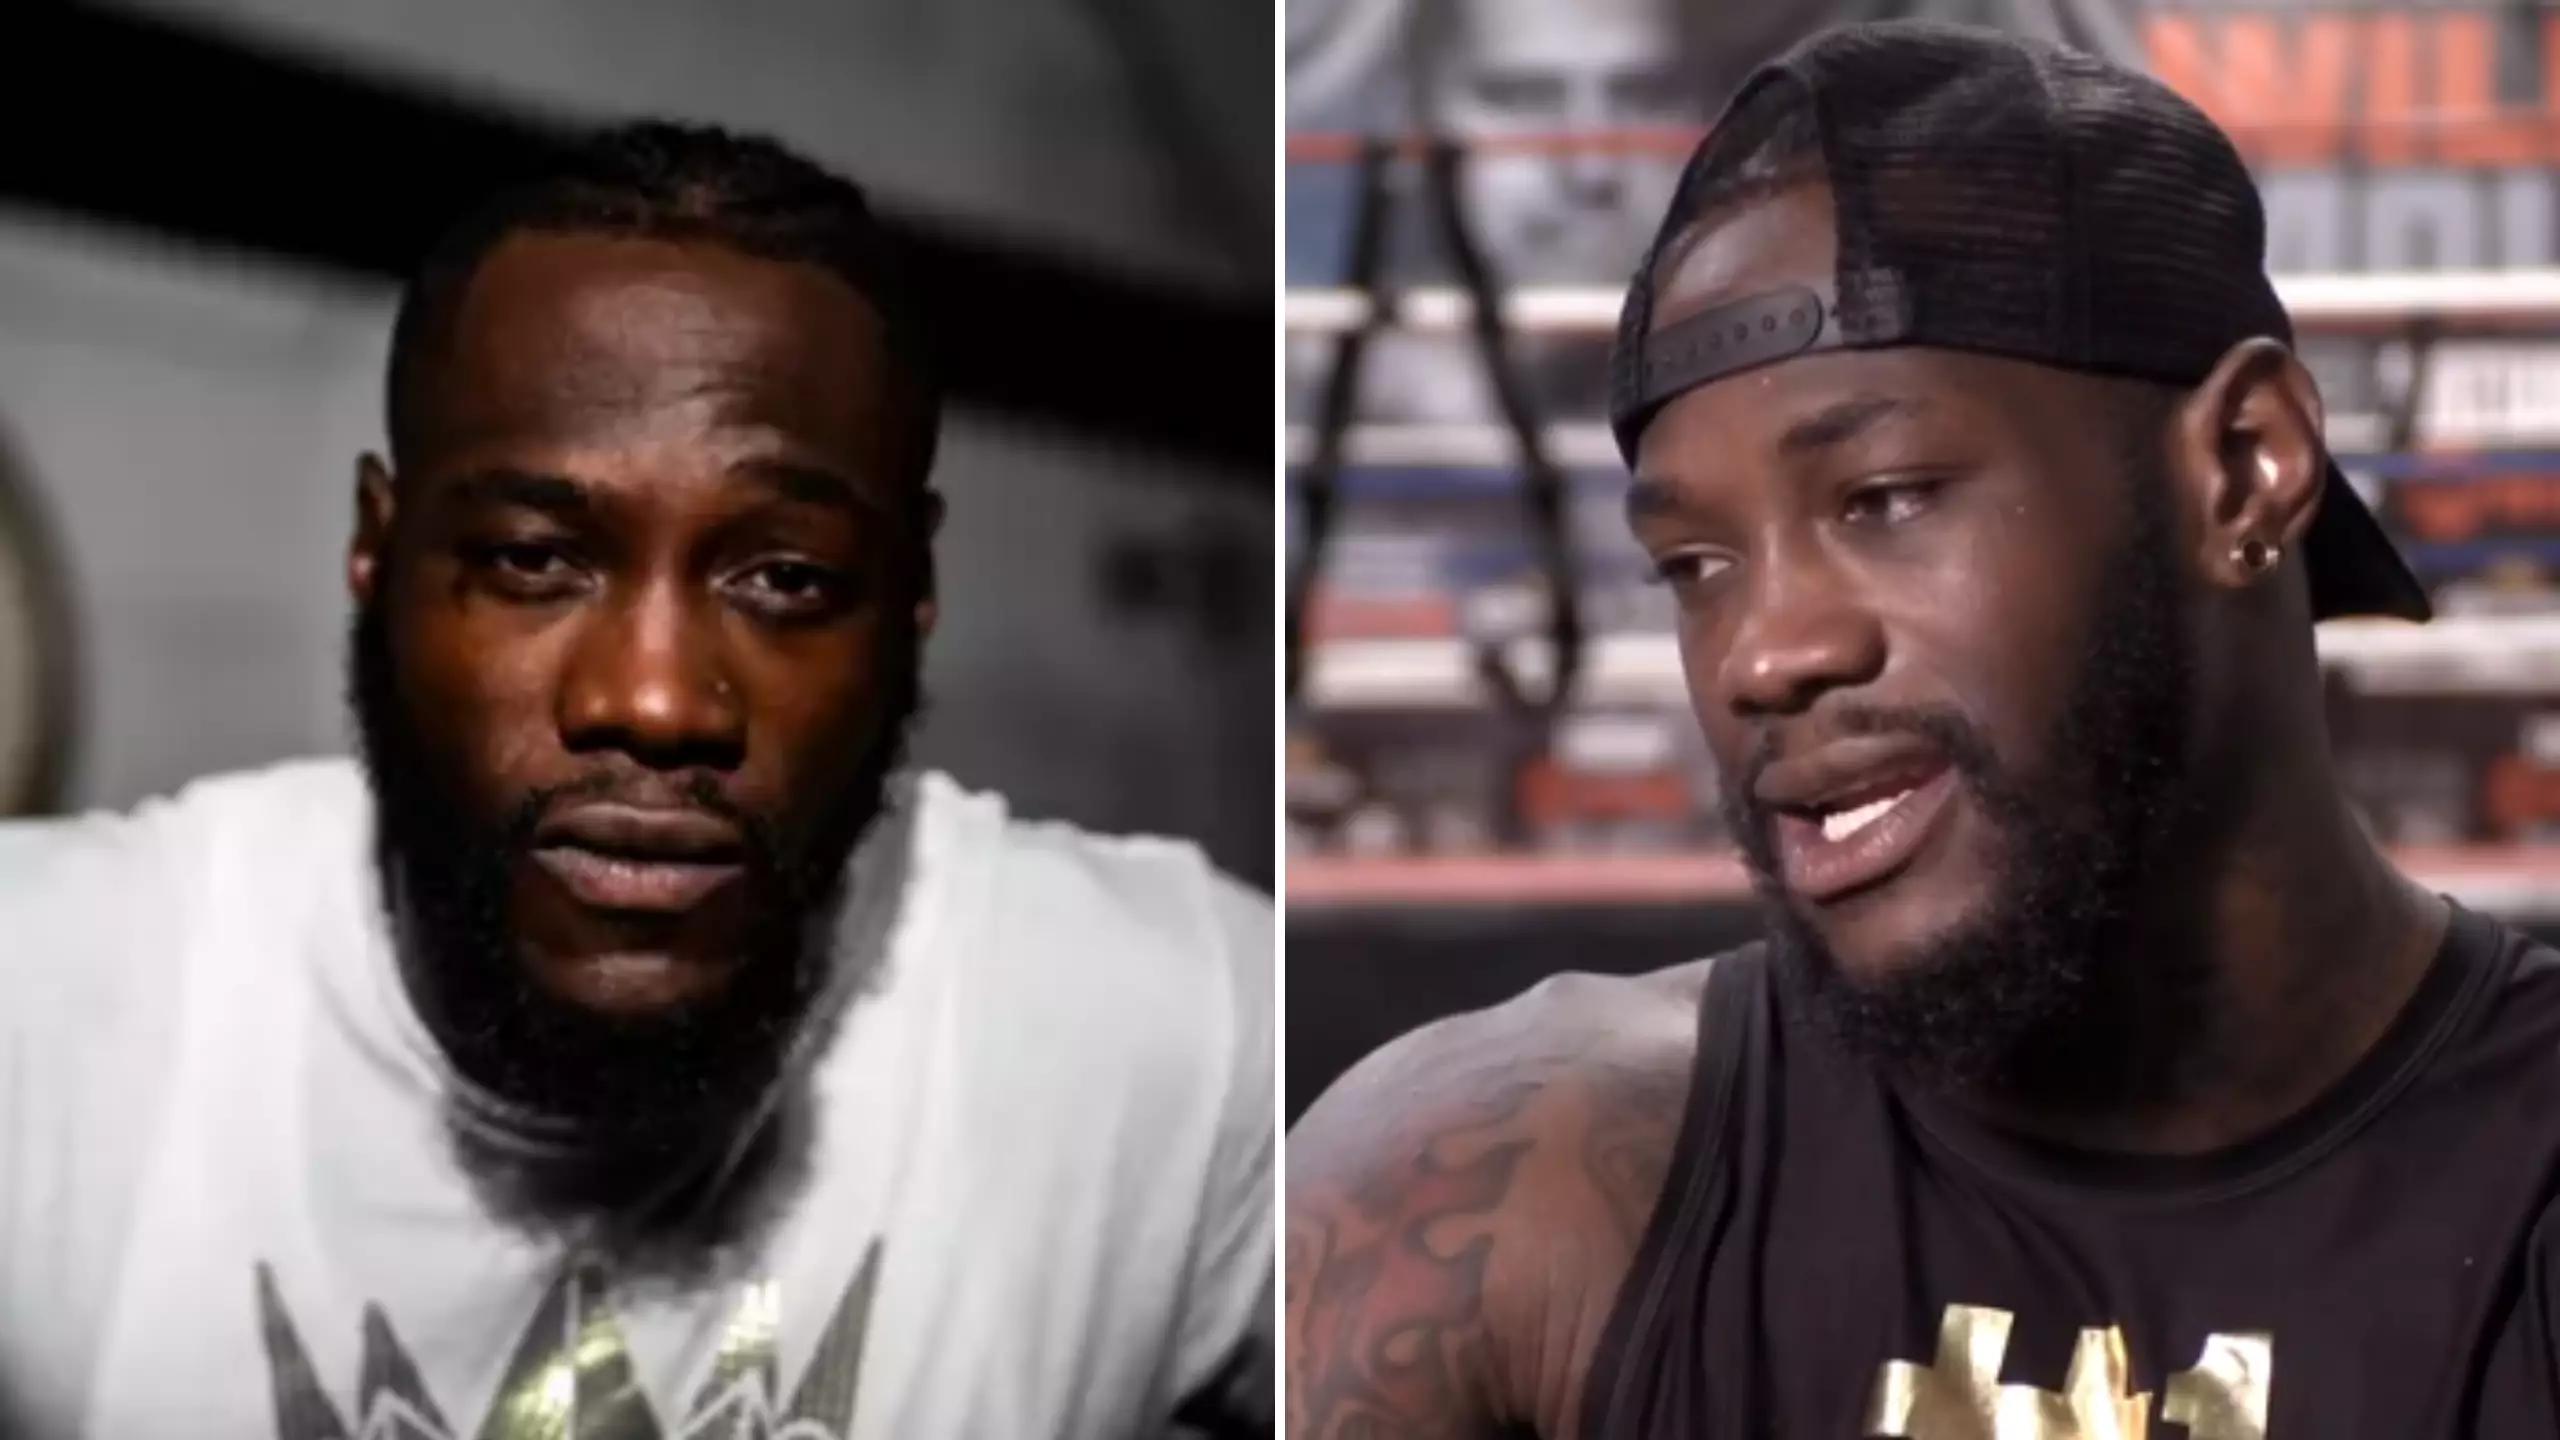 Deontay Wilder Reveals He Once Considered Shooting Himself